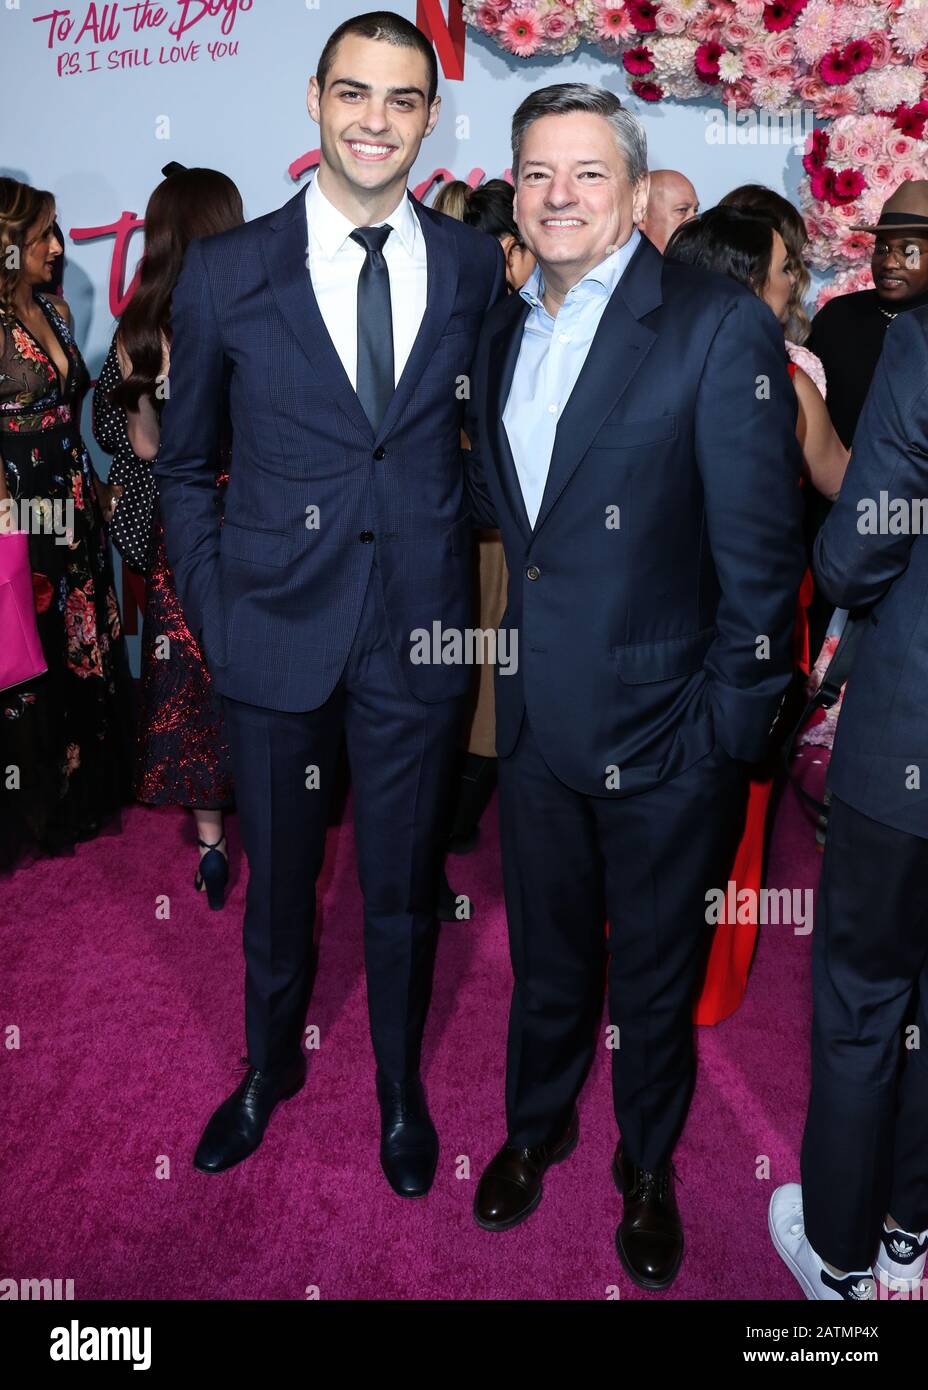 Hollywood, United States. 03rd Feb, 2020. HOLLYWOOD, LOS ANGELES, CALIFORNIA, USA - FEBRUARY 03: Actor Noah Centineo and Netflix Chief Content Officer Ted Sarandos arrive at the Los Angeles Premiere Of Netflix's 'To All The Boys: P.S. I Still Love You' held at the Egyptian Theatre on February 3, 2020 in Hollywood, Los Angeles, California, United States. (Photo by Xavier Collin/Image Press Agency) Credit: Image Press Agency/Alamy Live News Stock Photo